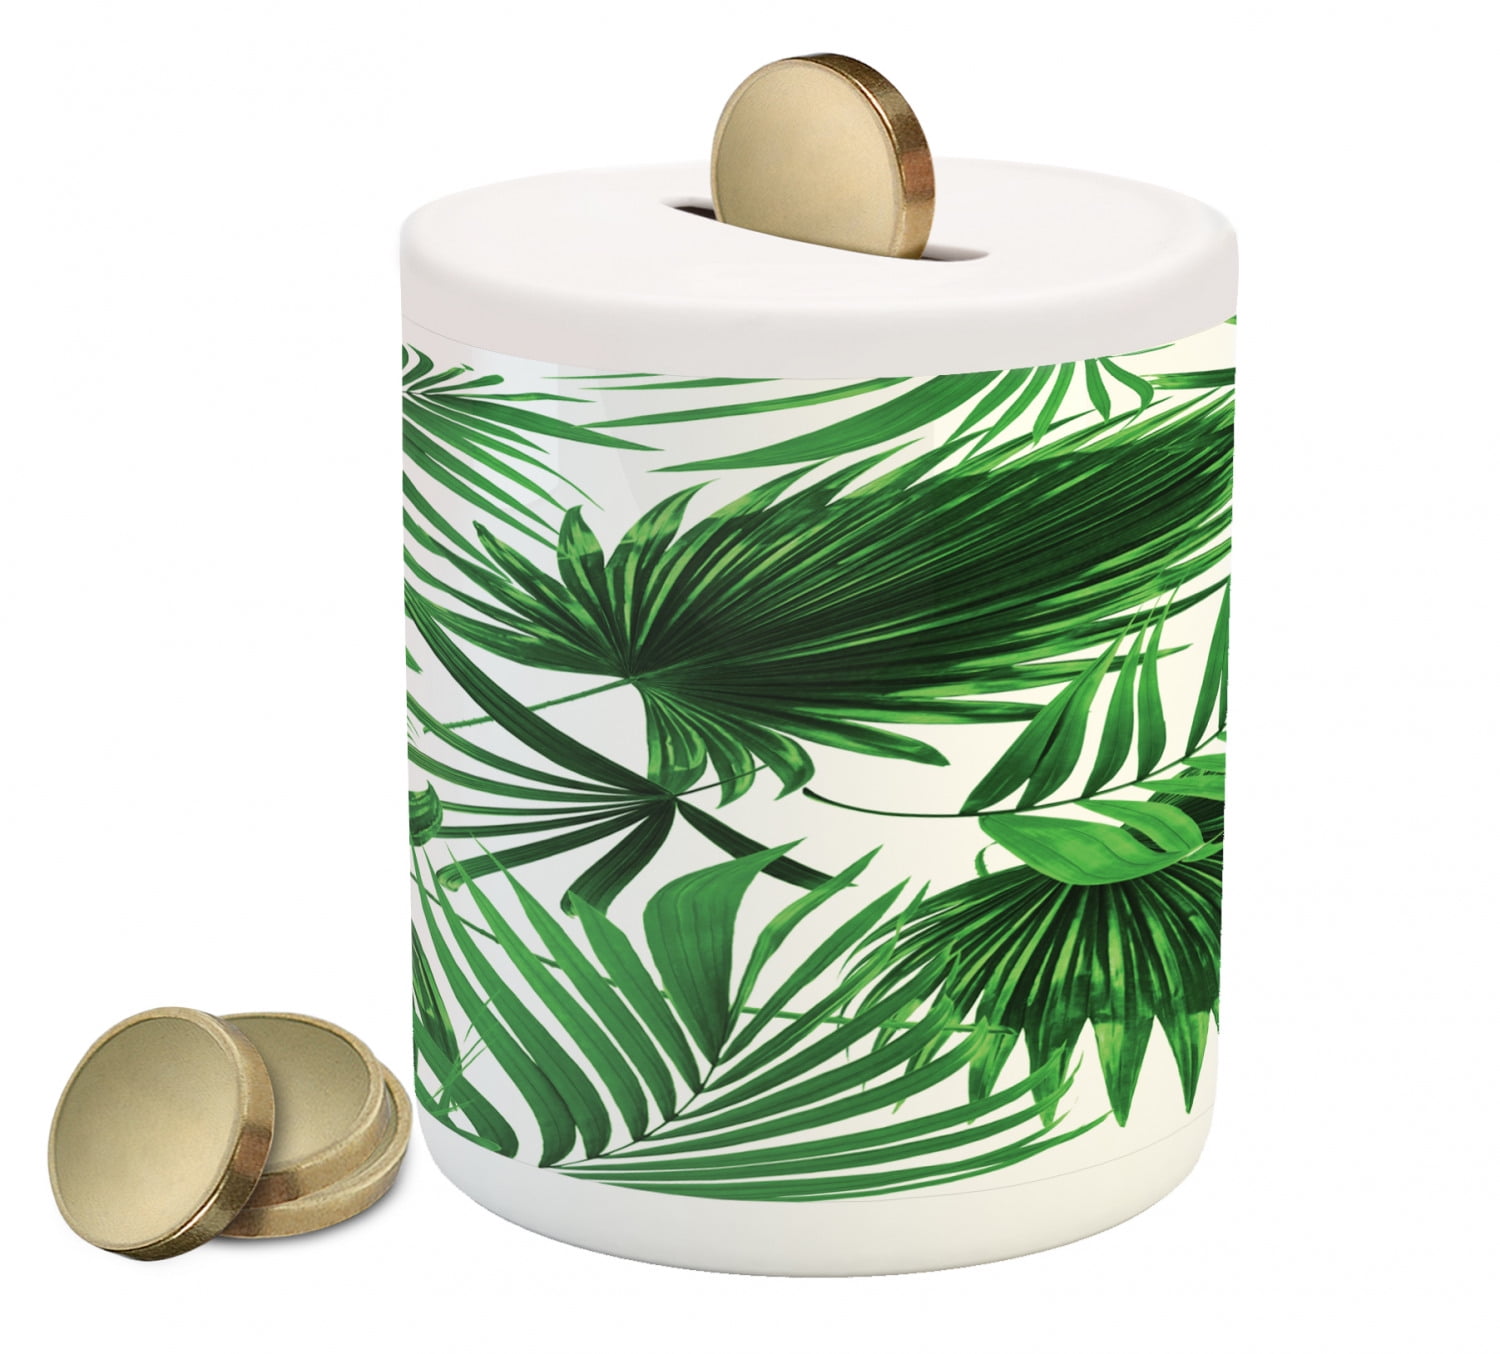 Ambesonne Leaves Piggy Bank Fern Green Marigold Mother Nature Feng Shui Themed Vegetation Growth Tranquil Illustration Printed Ceramic Coin Bank Money Box for Cash Saving